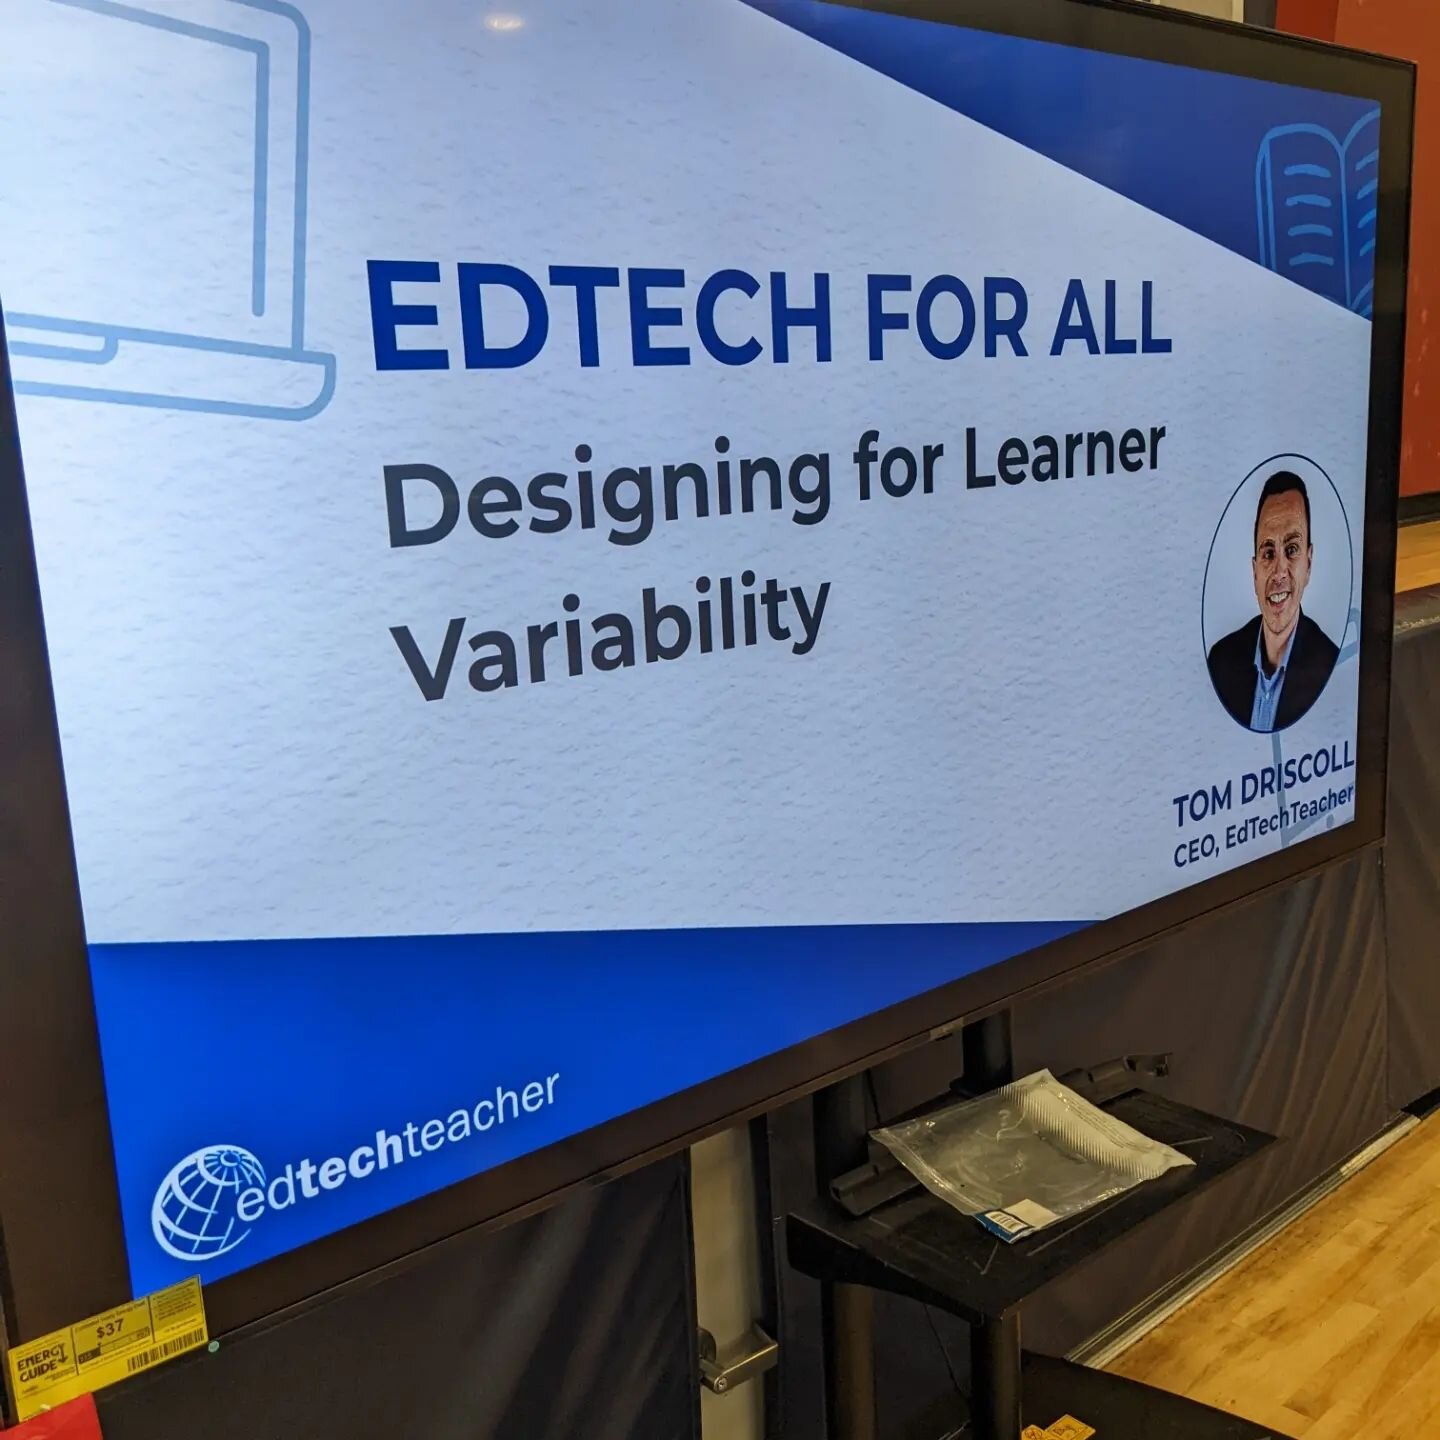 So honored to be working today with the great team of educators at Orchard School District in San Jose! Opening &quot;#EdTech For All&quot; keynote followed by #Enhanced Assessments and Feedback with #Edtech&quot; breakout sessions. @edtechteacher21